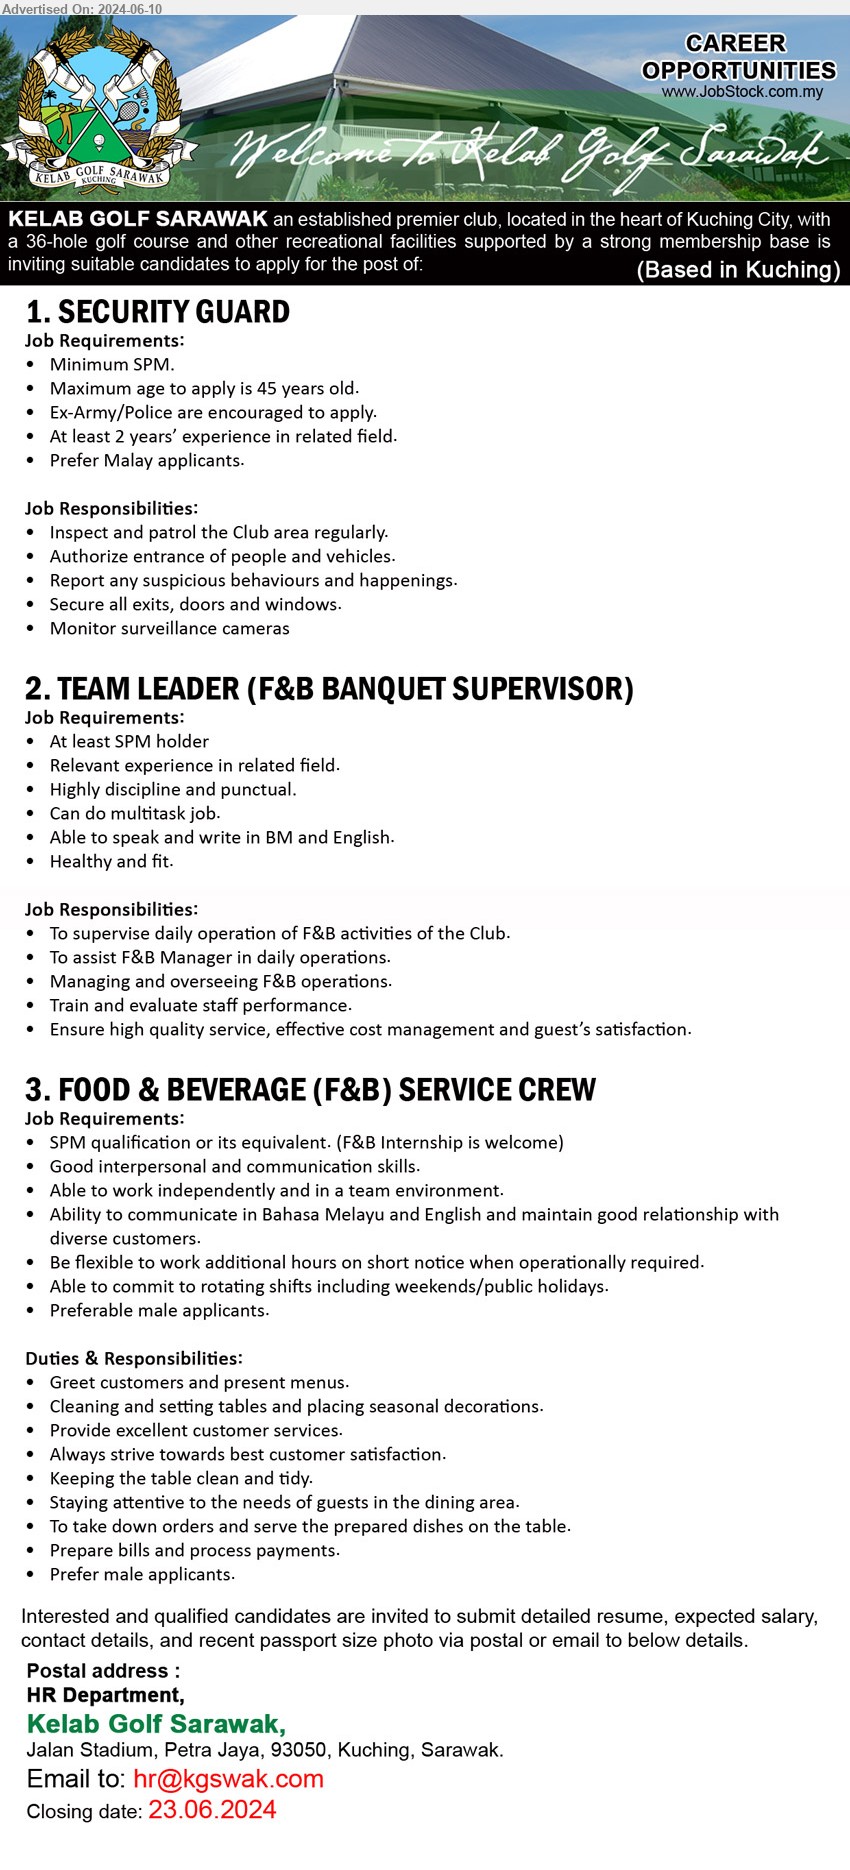 KELAB GOLF SARAWAK - 1. SECURITY GUARD  (Kuching), SPM, Ex-Army/Police are encouraged to apply., 2 yrs. exp.,...
2. TEAM LEADER (F&B BANQUET SUPERVISOR) (Kuching), SPM, To supervise daily operation of F&B activities of the Club.,...
3. FOOD & BEVERAGE (F&B) SERVICE CREW (Kuching), SPM qualification or its equivalent. (F&B Internship is welcome),...
Email resume to ...